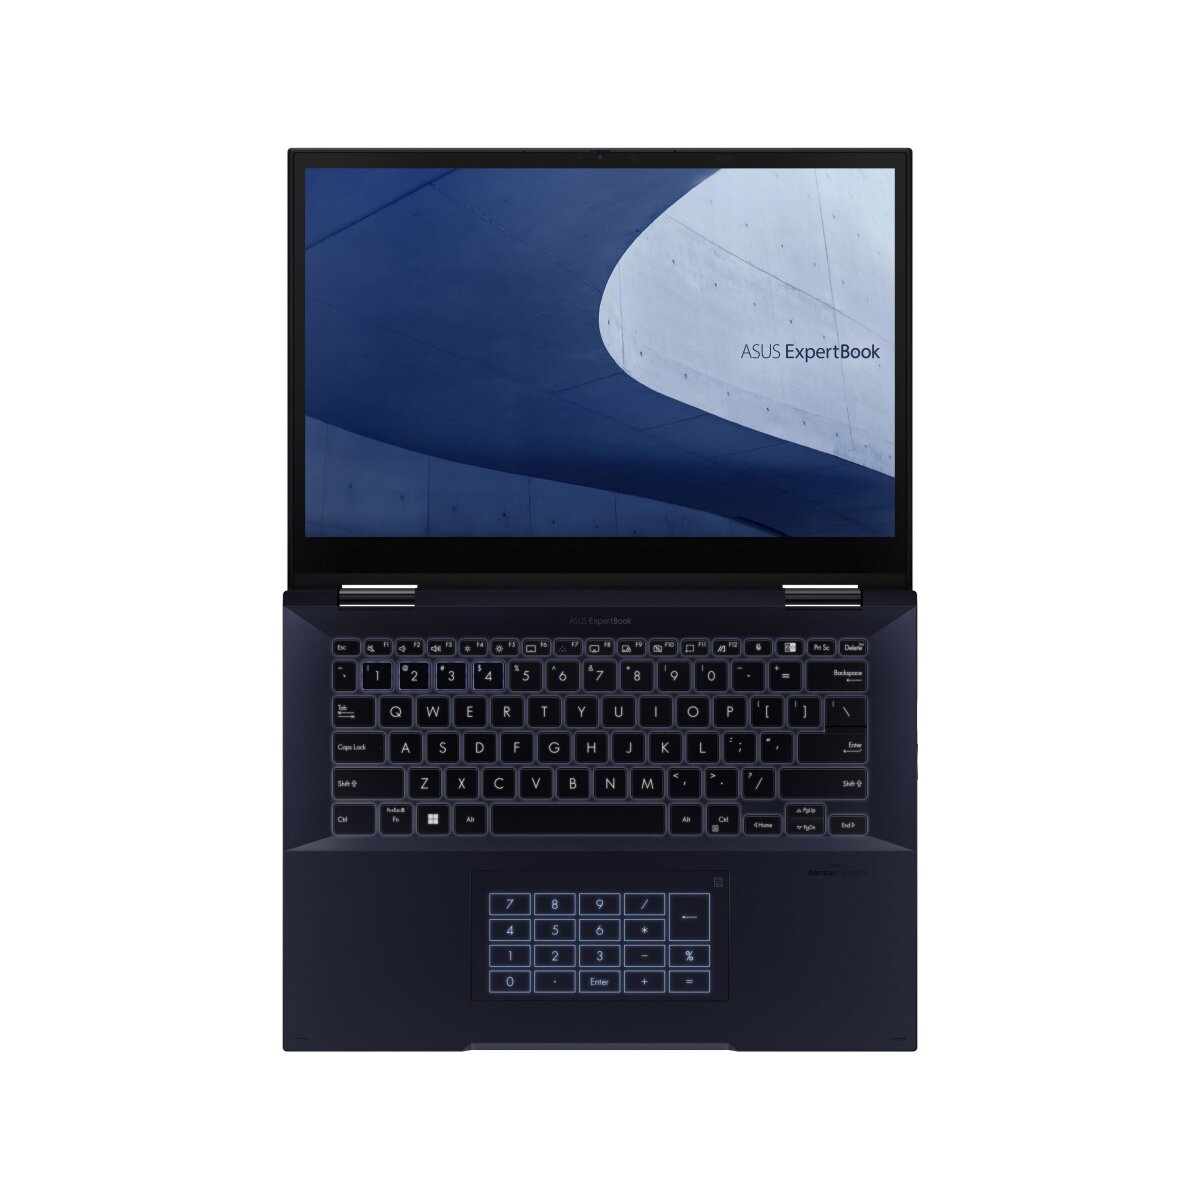 ASUS ExpertBook B7402FBA-L90593X - 90NX04V1-M00NS0 laptop specifications